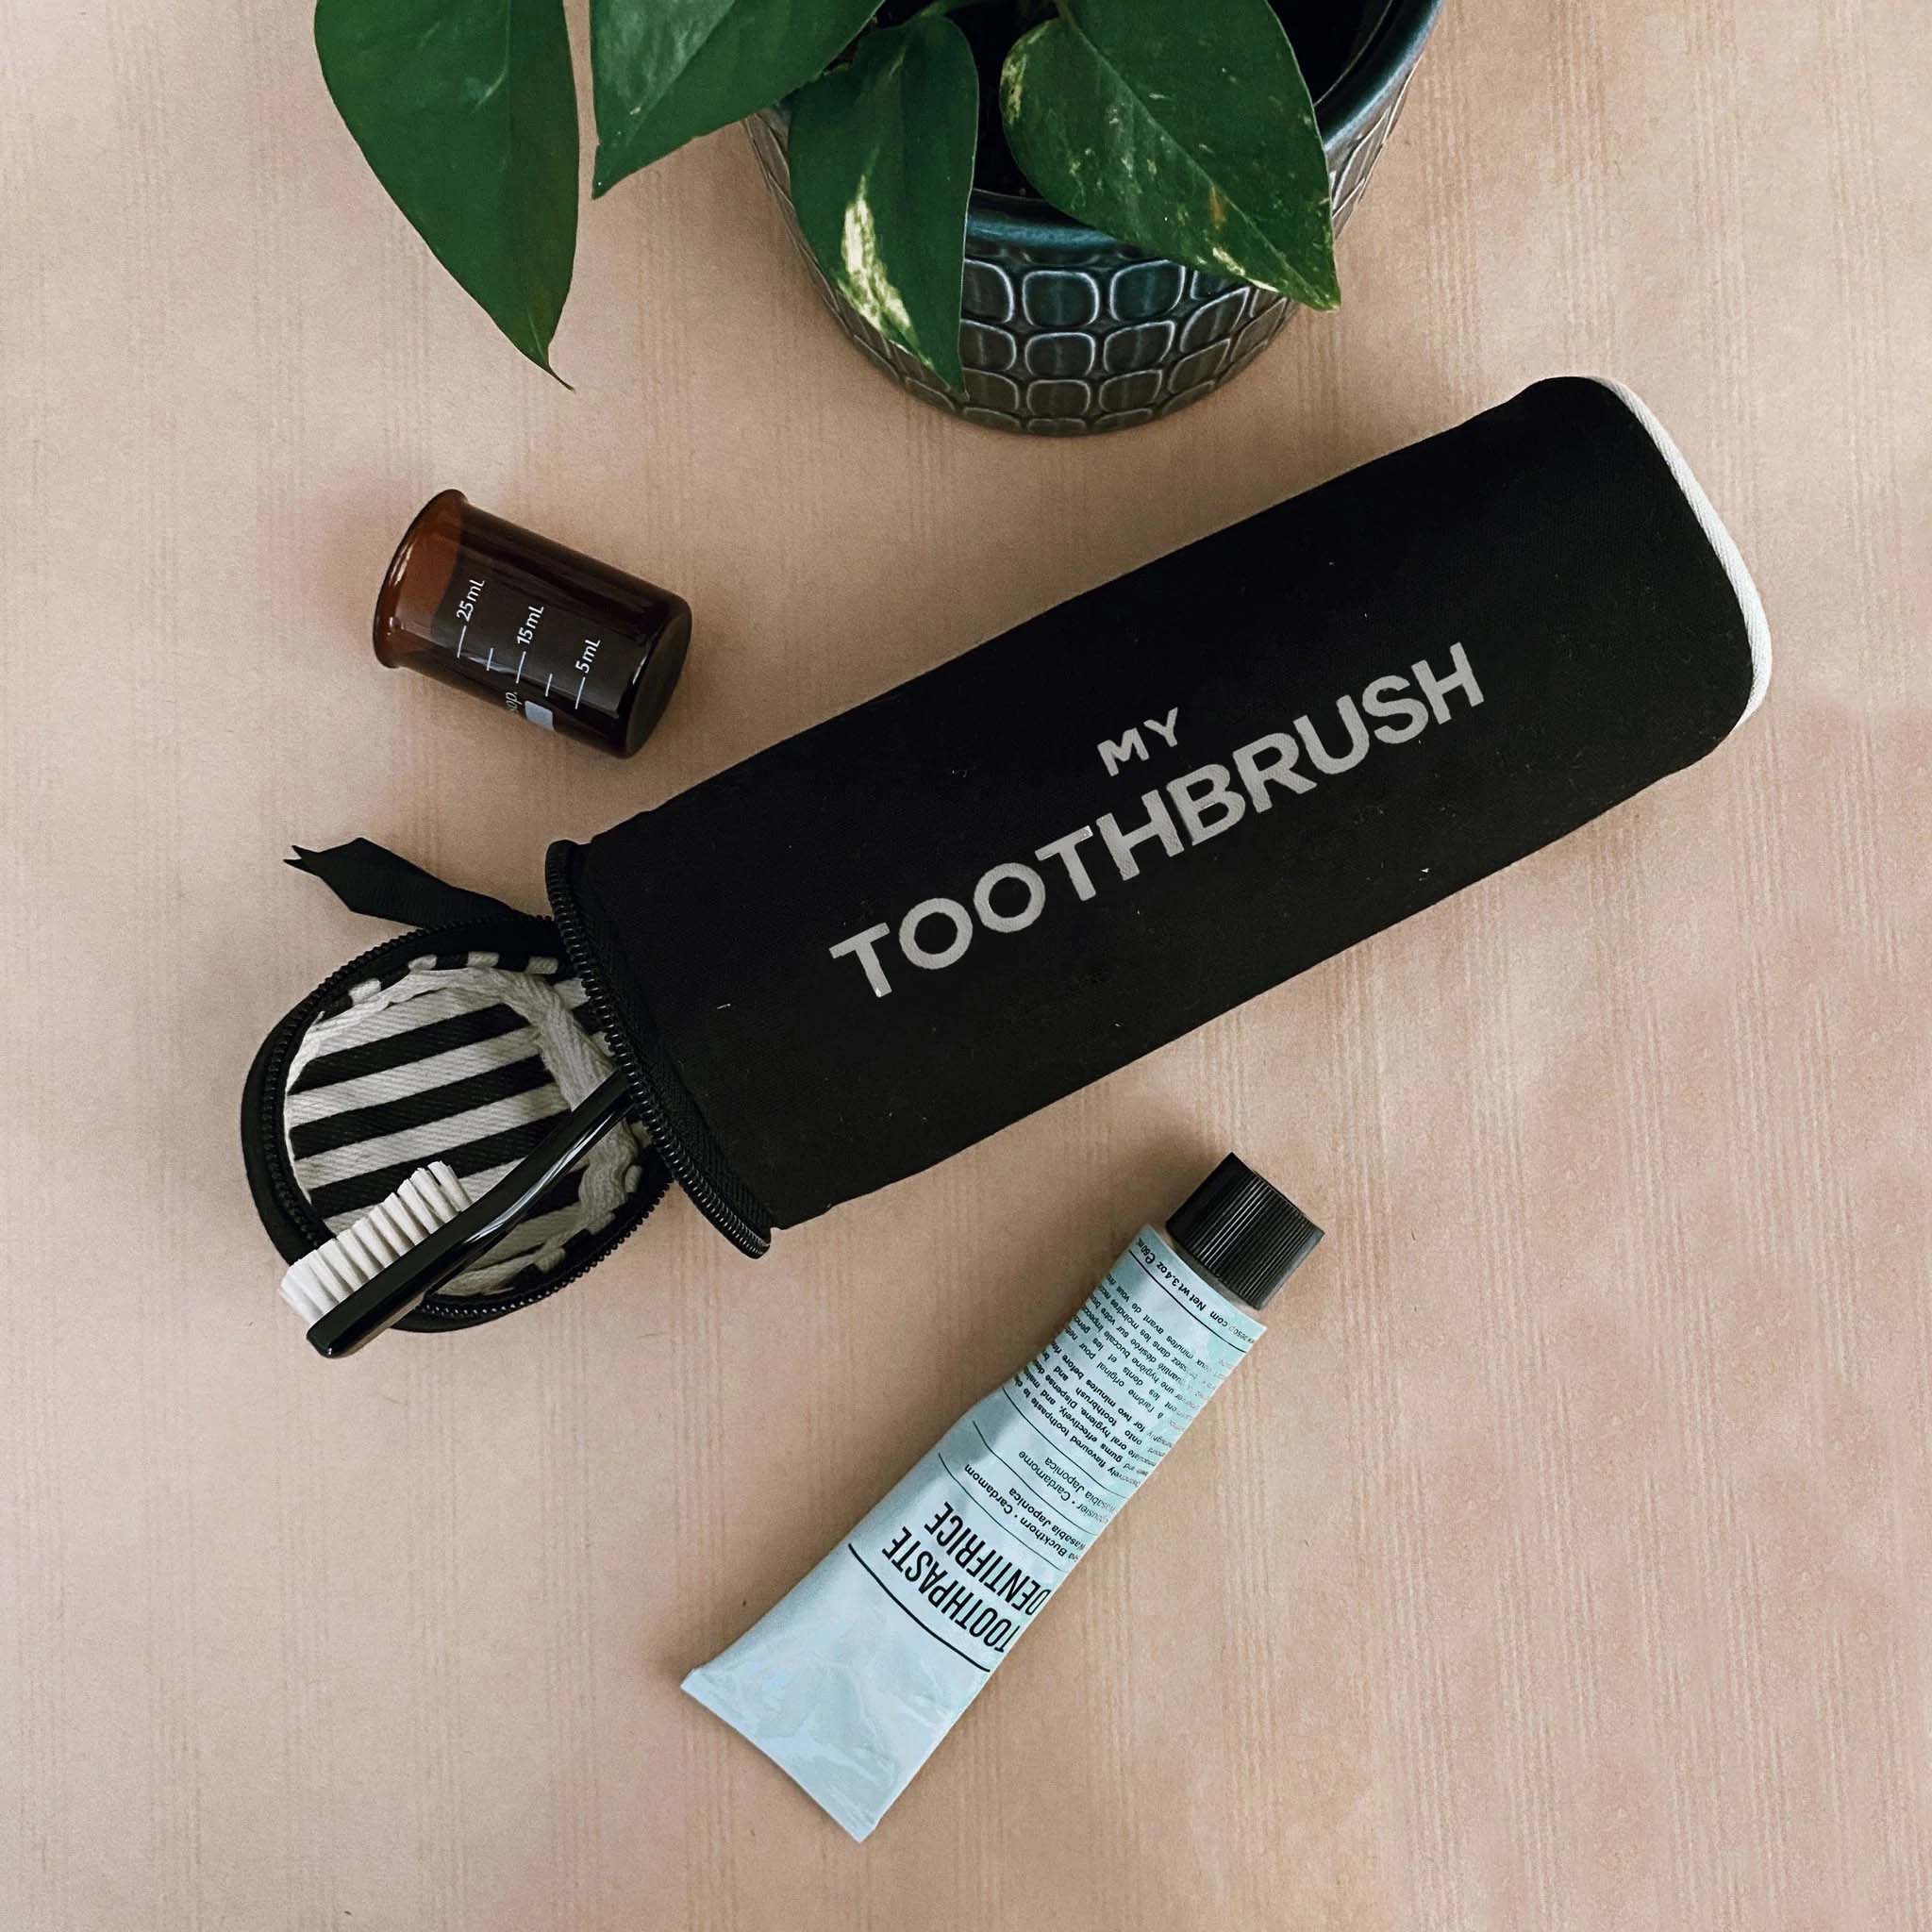 Toothbrush Travel Case, Black with Light Gray Print | Bag-all